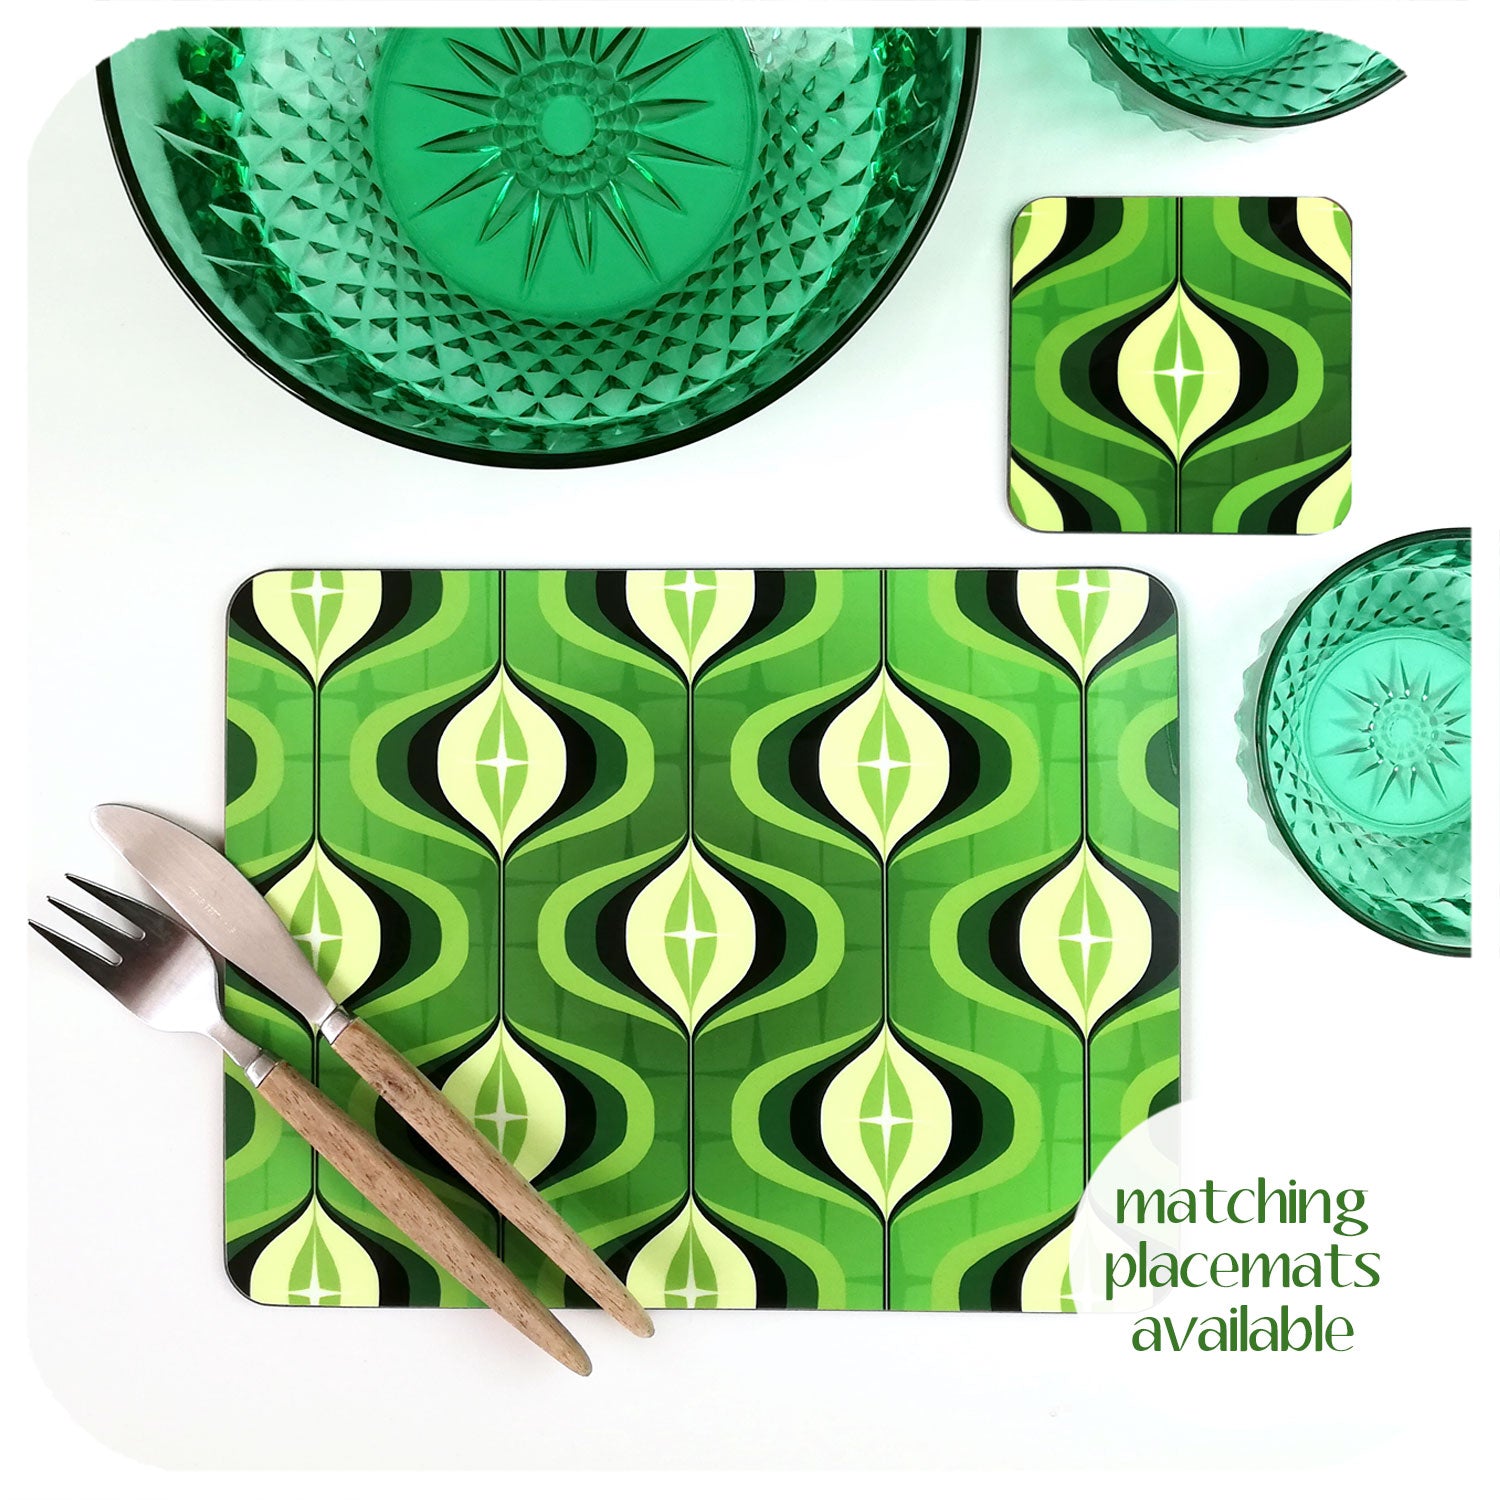 Matching 70s Op Art Placemats available | The Inkabilly Emporium